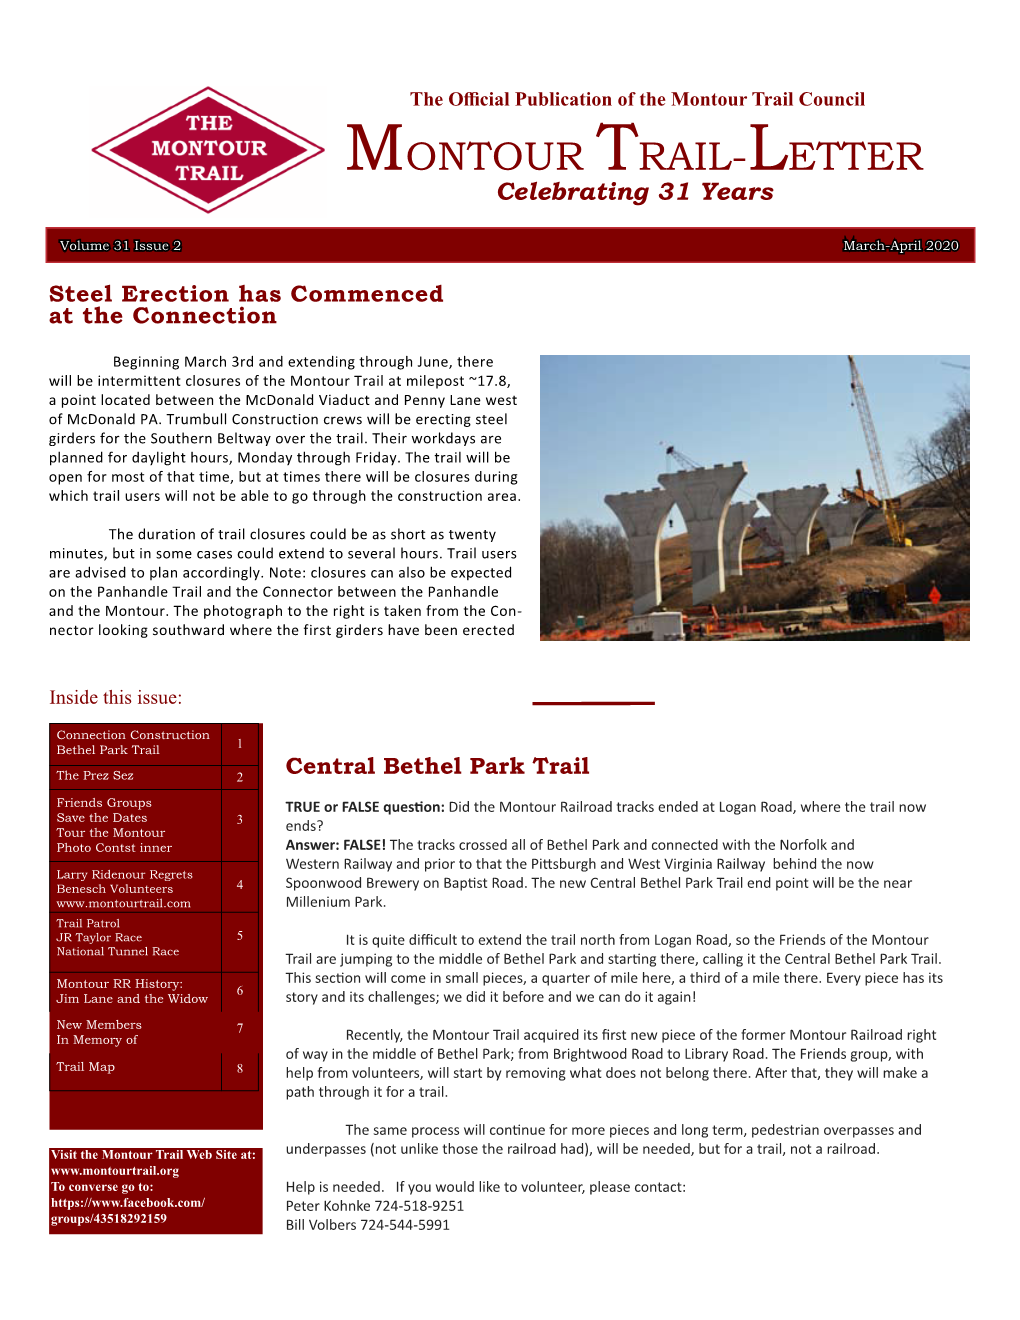 March-April Newsletter